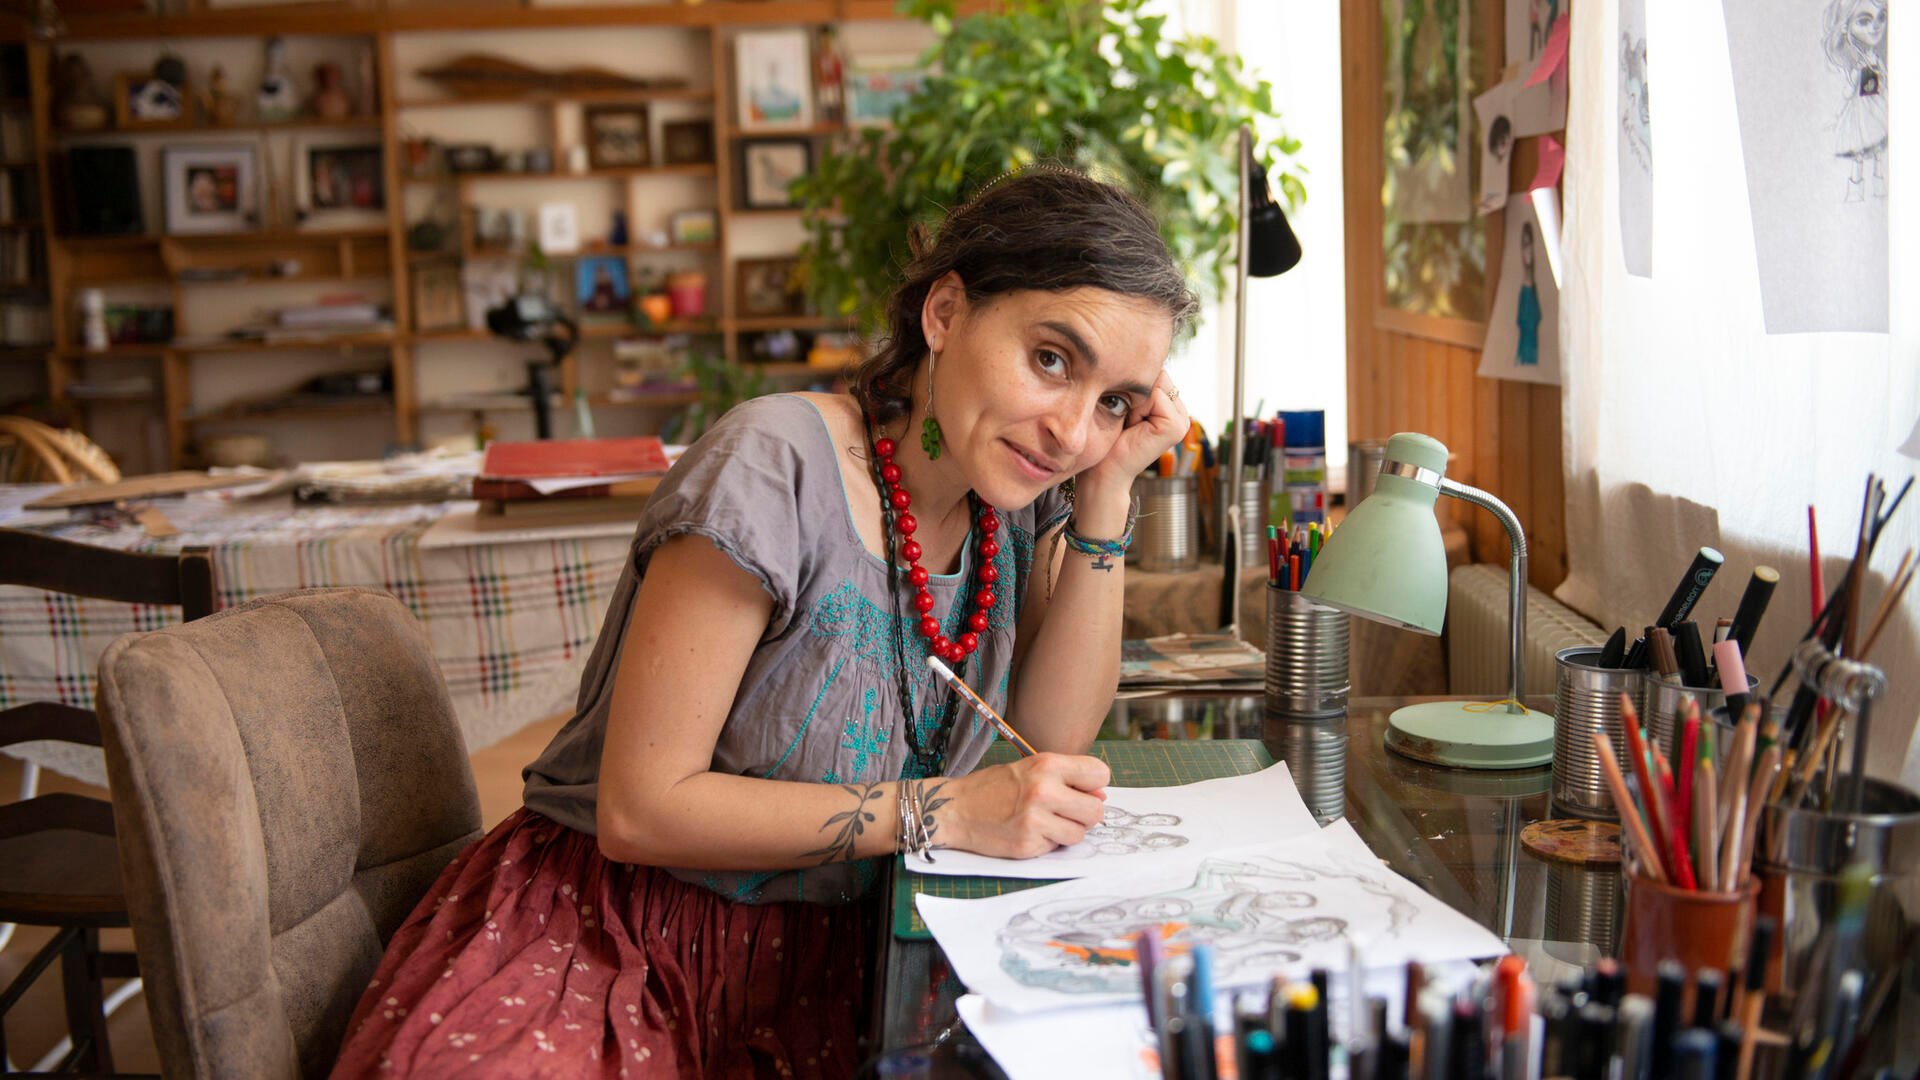 Artist and activist Diala Brisly, leaning on her desk holding a pencil, sketches an illustration of refugees for World Refugee Day 2021.